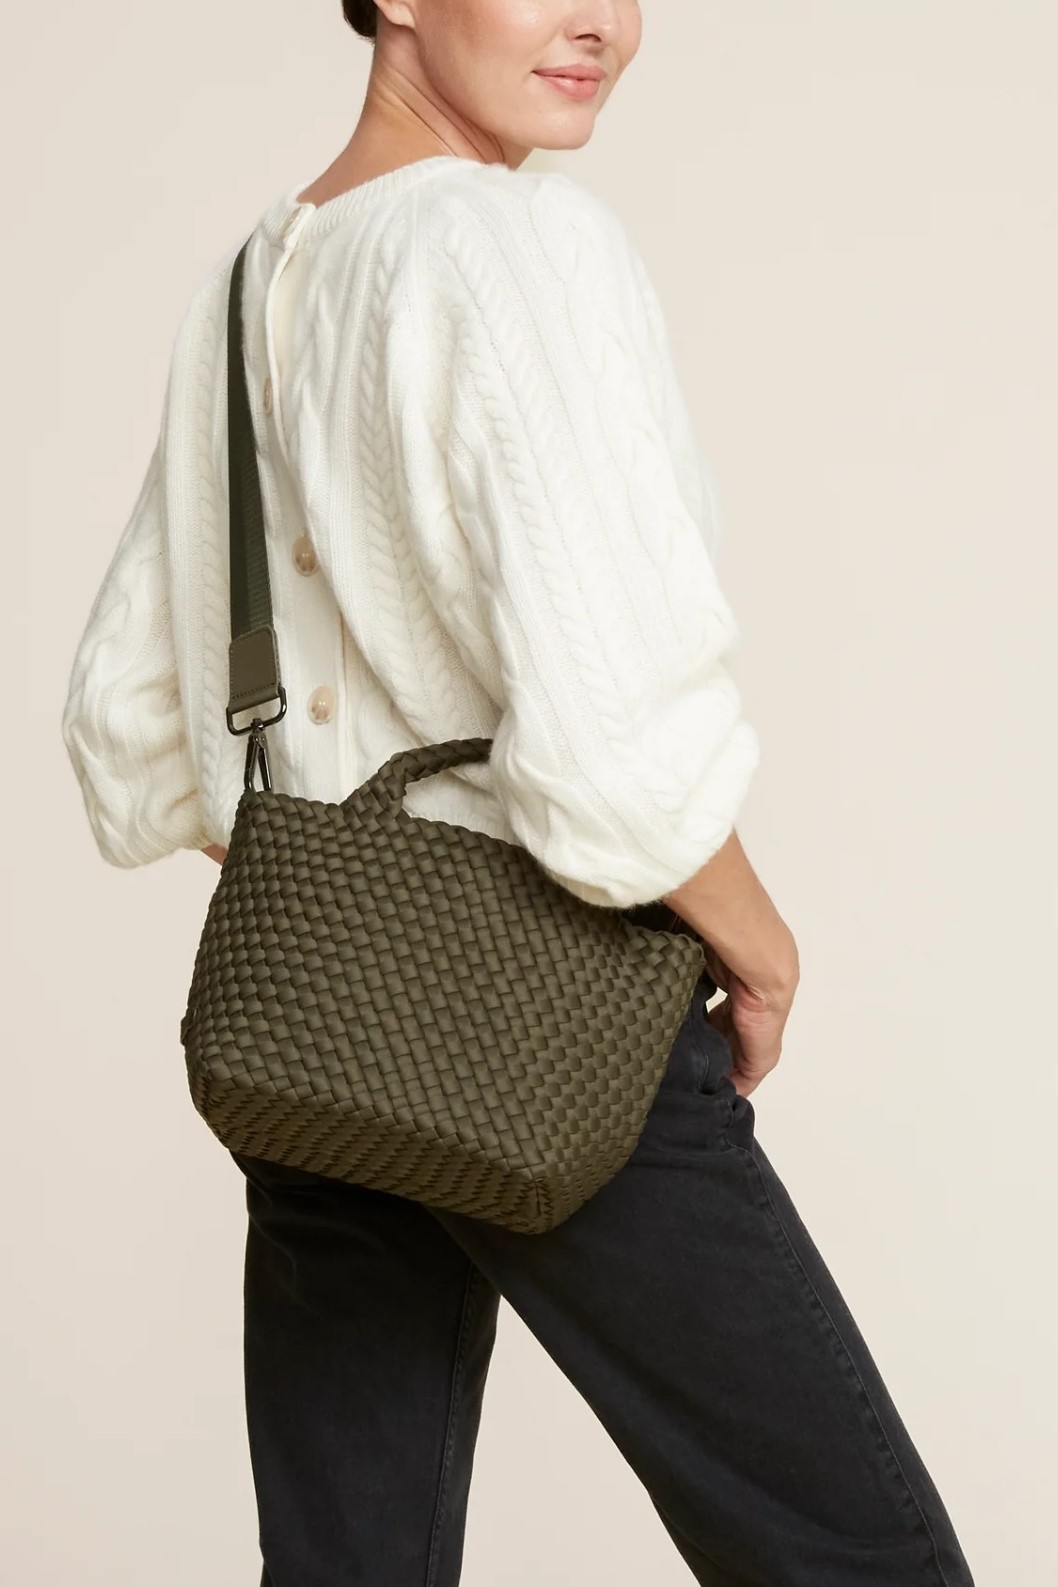 NAGHEDI Handwoven Small Tote St. Barth in Olive